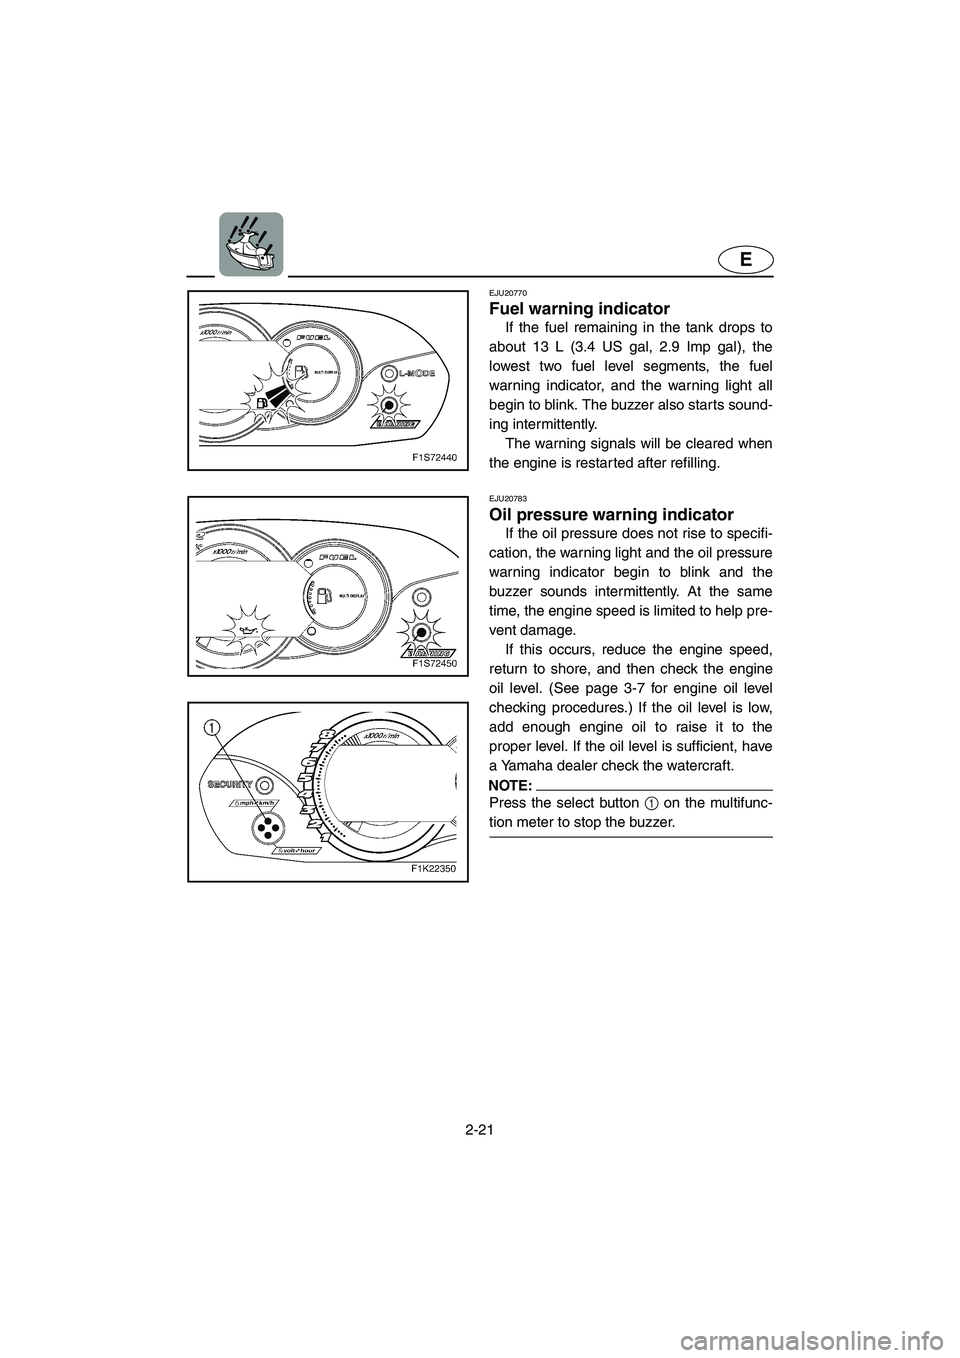 YAMAHA VX CRUISER 2006  Owners Manual 2-21
E
EJU20770 
Fuel warning indicator 
If the fuel remaining in the tank drops to
about 13 L (3.4 US gal, 2.9 Imp gal), the
lowest two fuel level segments, the fuel
warning indicator, and the warnin